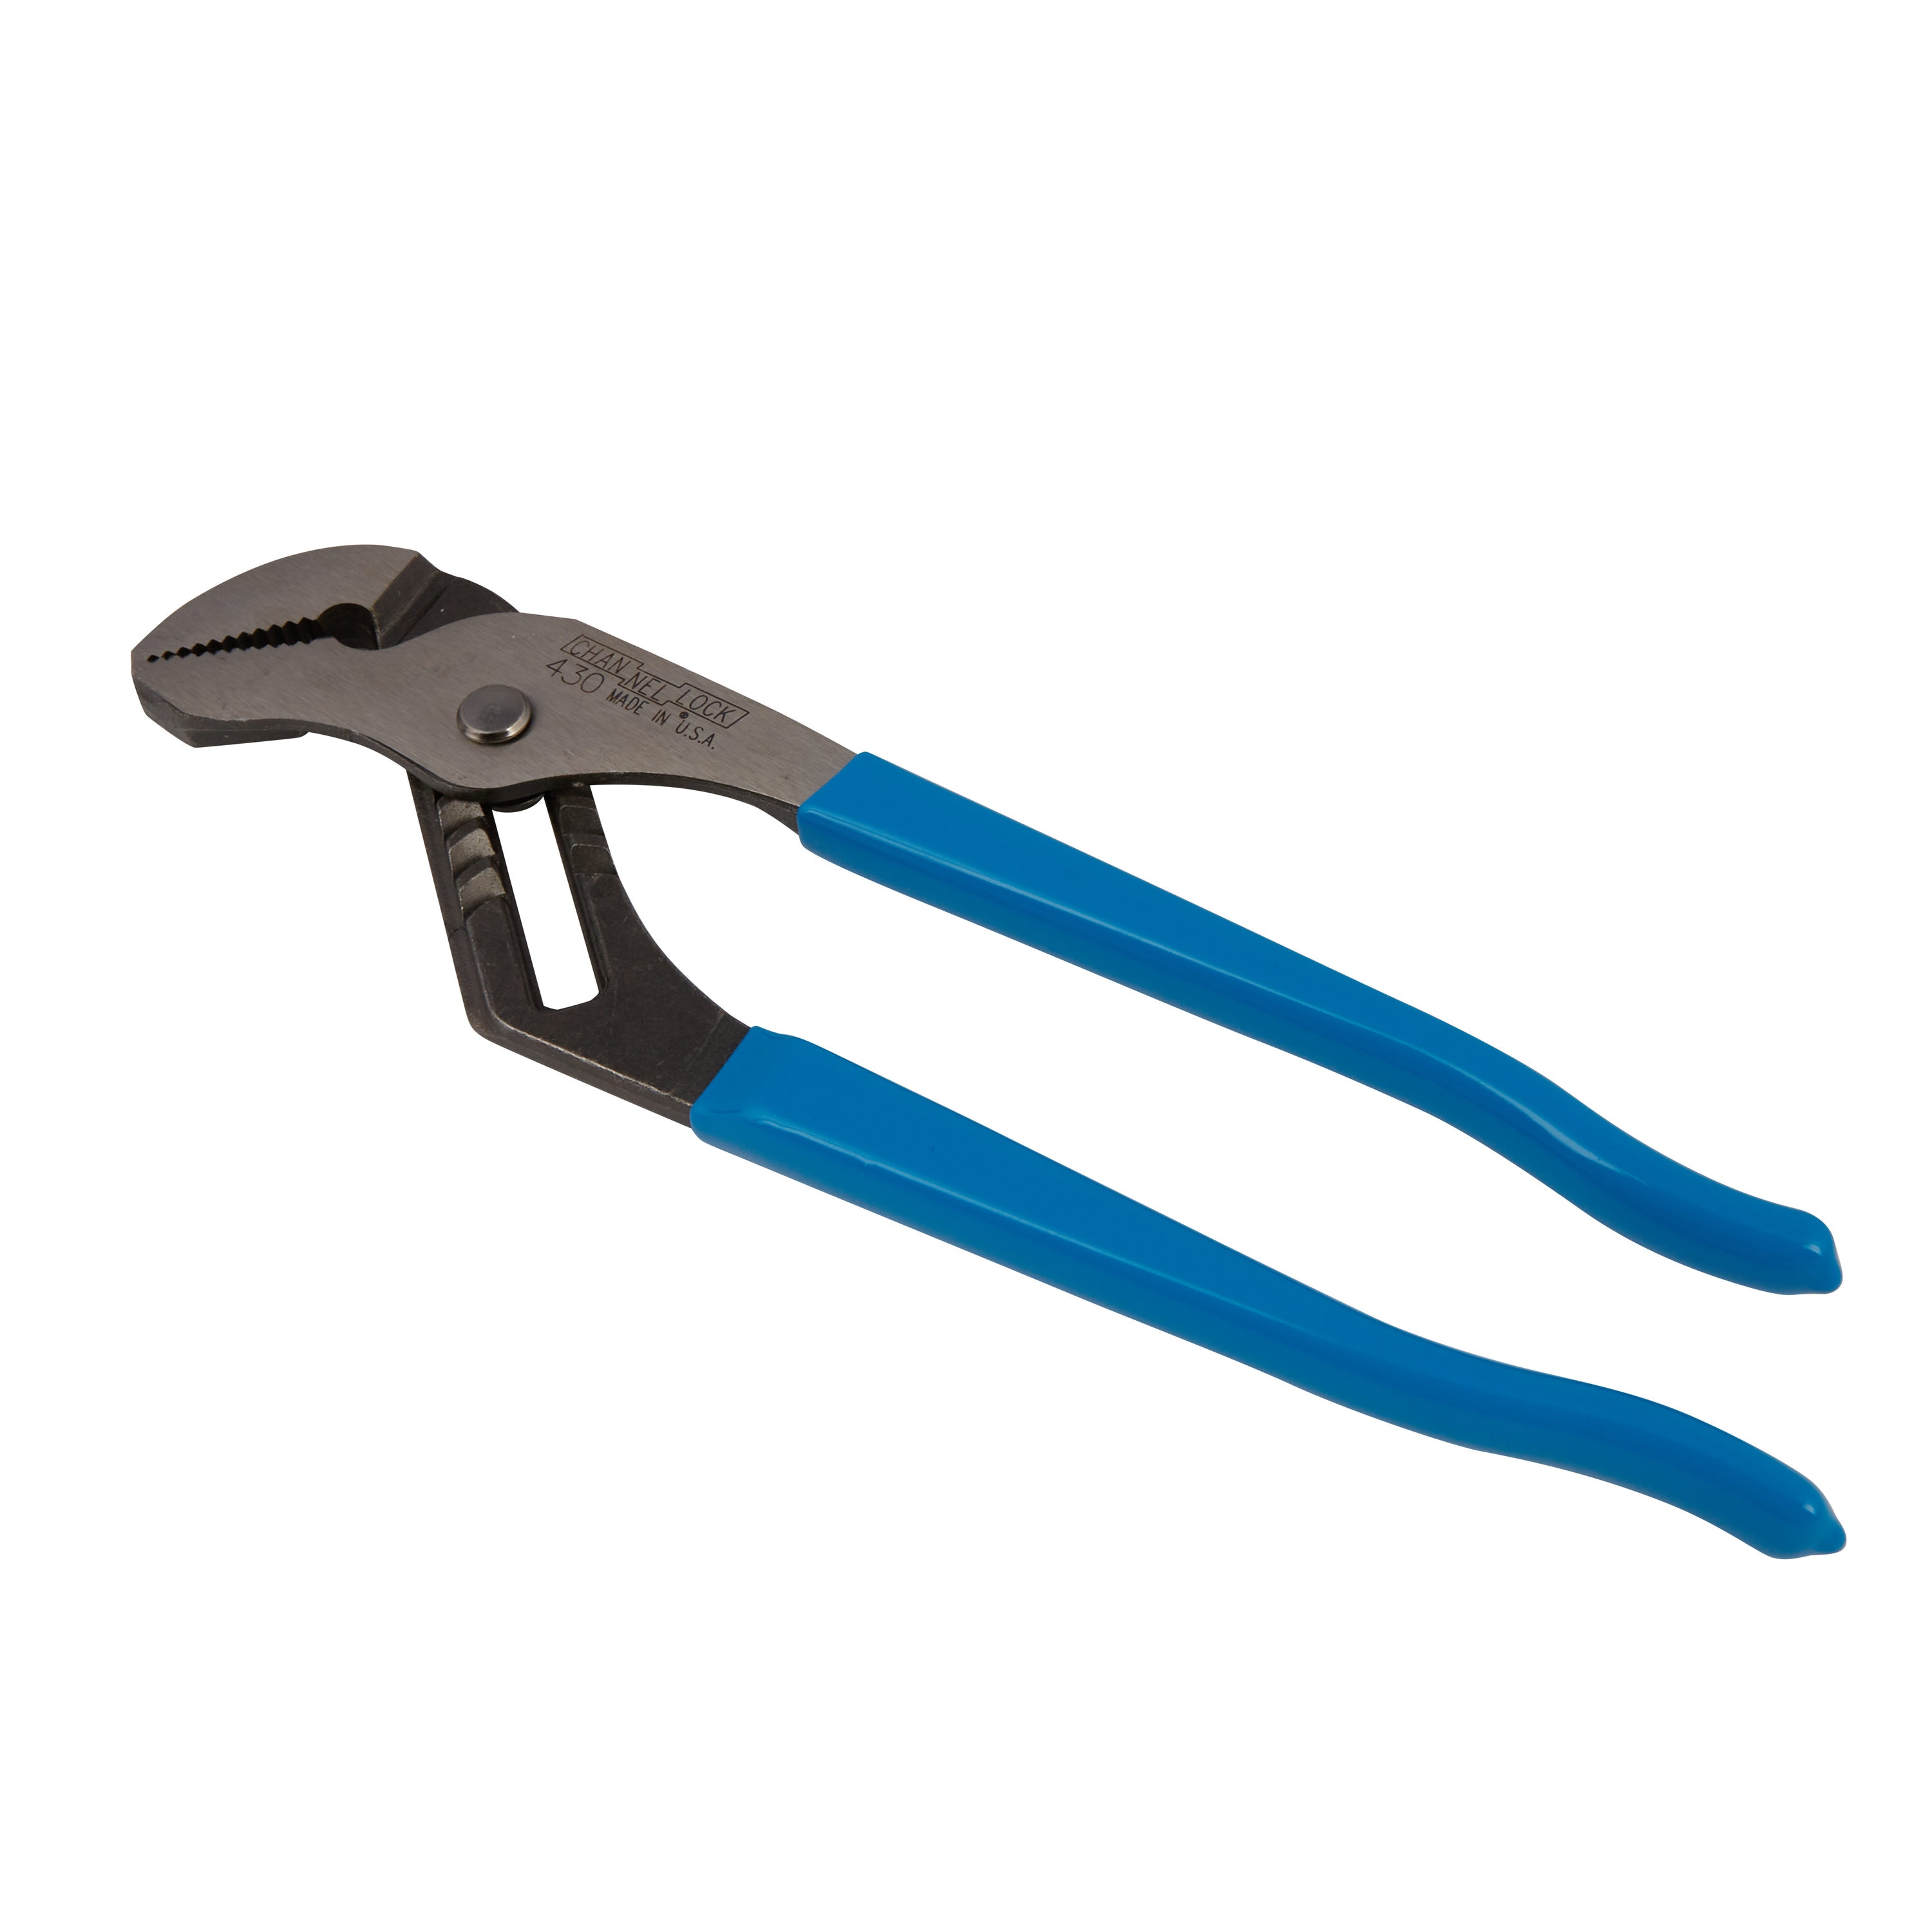 CHANNELLOCK 10-in Tongue and Groove Pliers in the Pliers 